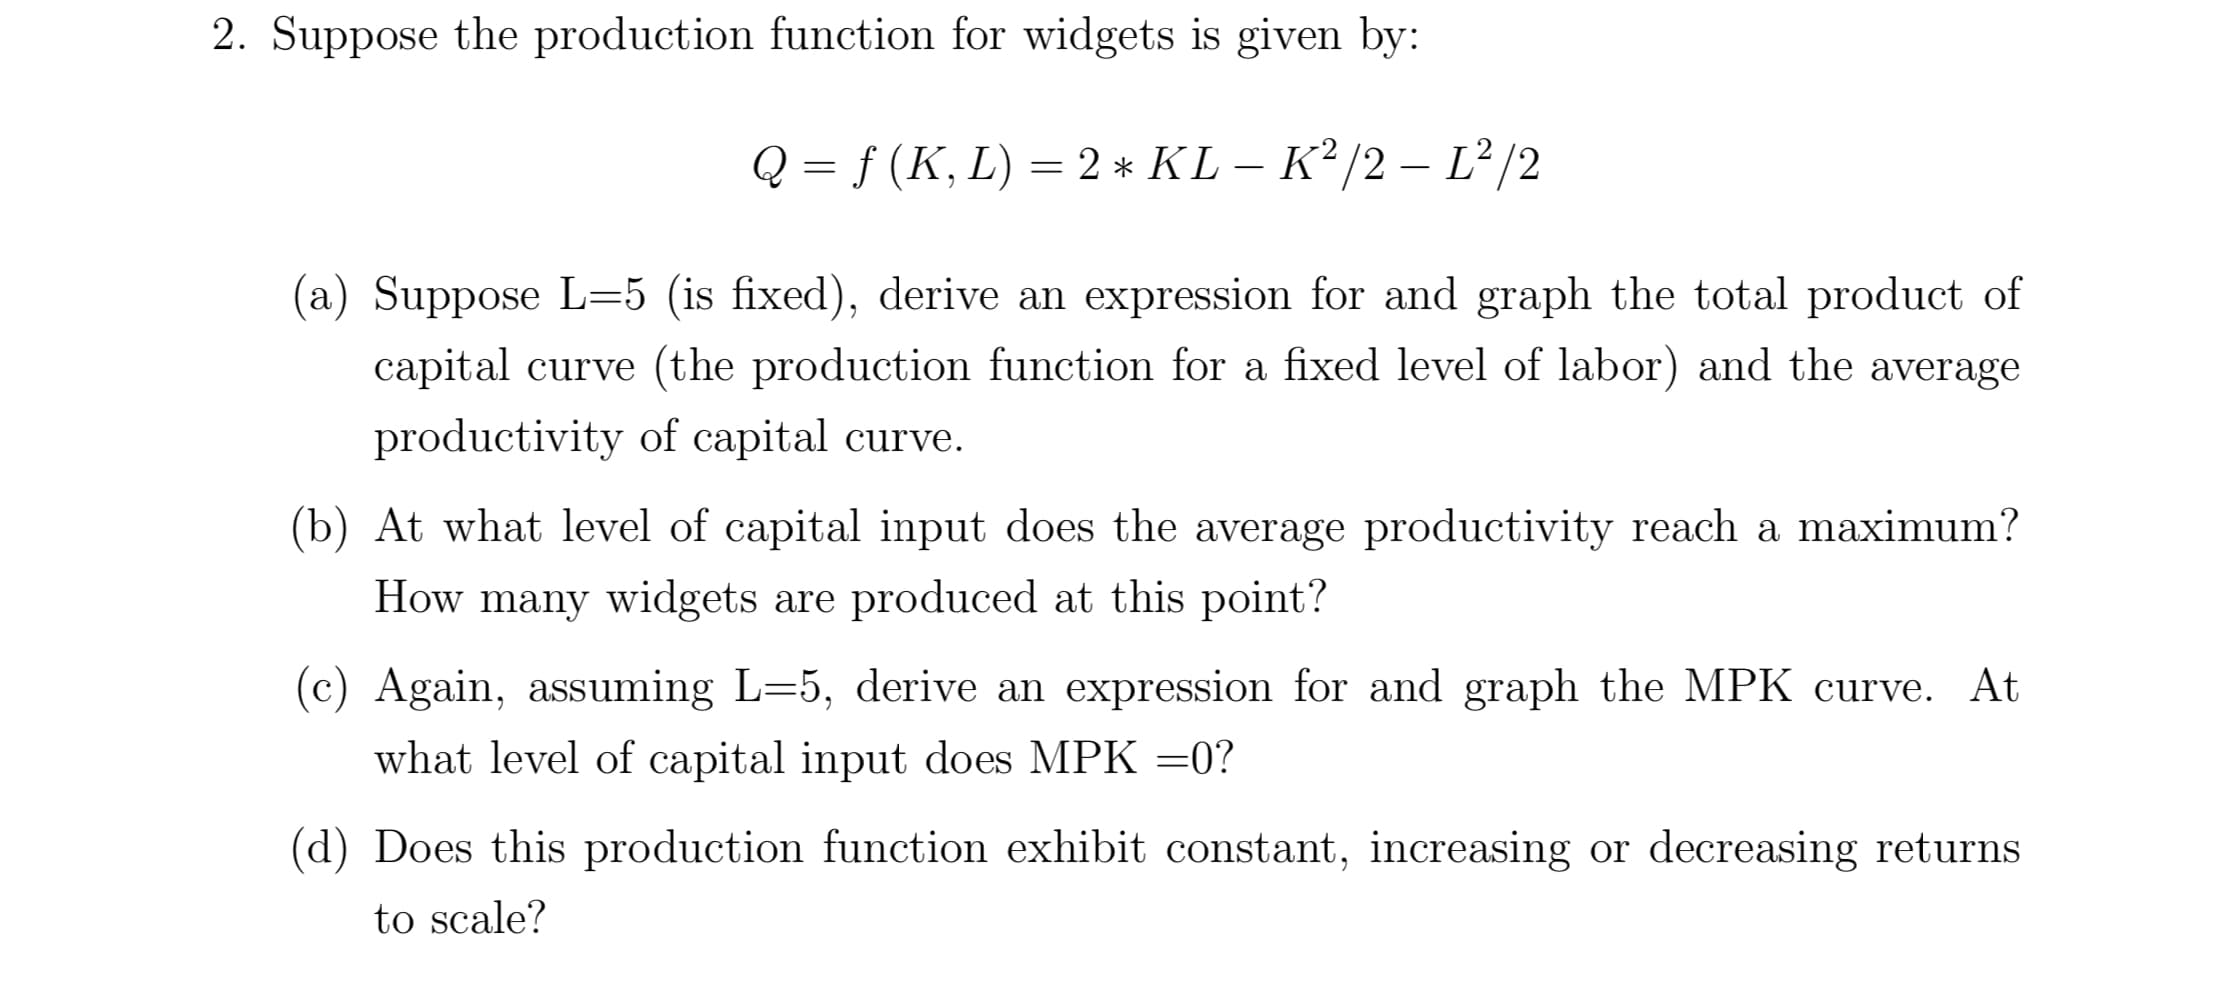 2. Suppose the production function for widgets is given by:
f (K, L) 2* KL - K2/2- L2/2
Q
1
(a) Suppose L-5 (is fixed), derive an expression for and graph the total product of
capital curve (the production function for a fixed level of labor) and the average
productivity of capital curve.
(b) At what level of capital input does the average productivity reach a maximum?
How many widgets are produced at this point?
(c) Again, assuming L=5, derive an expression for and graph the MPK curve. At
what level of capital input does MPK =0?
(d) Does this production function exhibit constant, increasing or decreasing returns
to scale?
